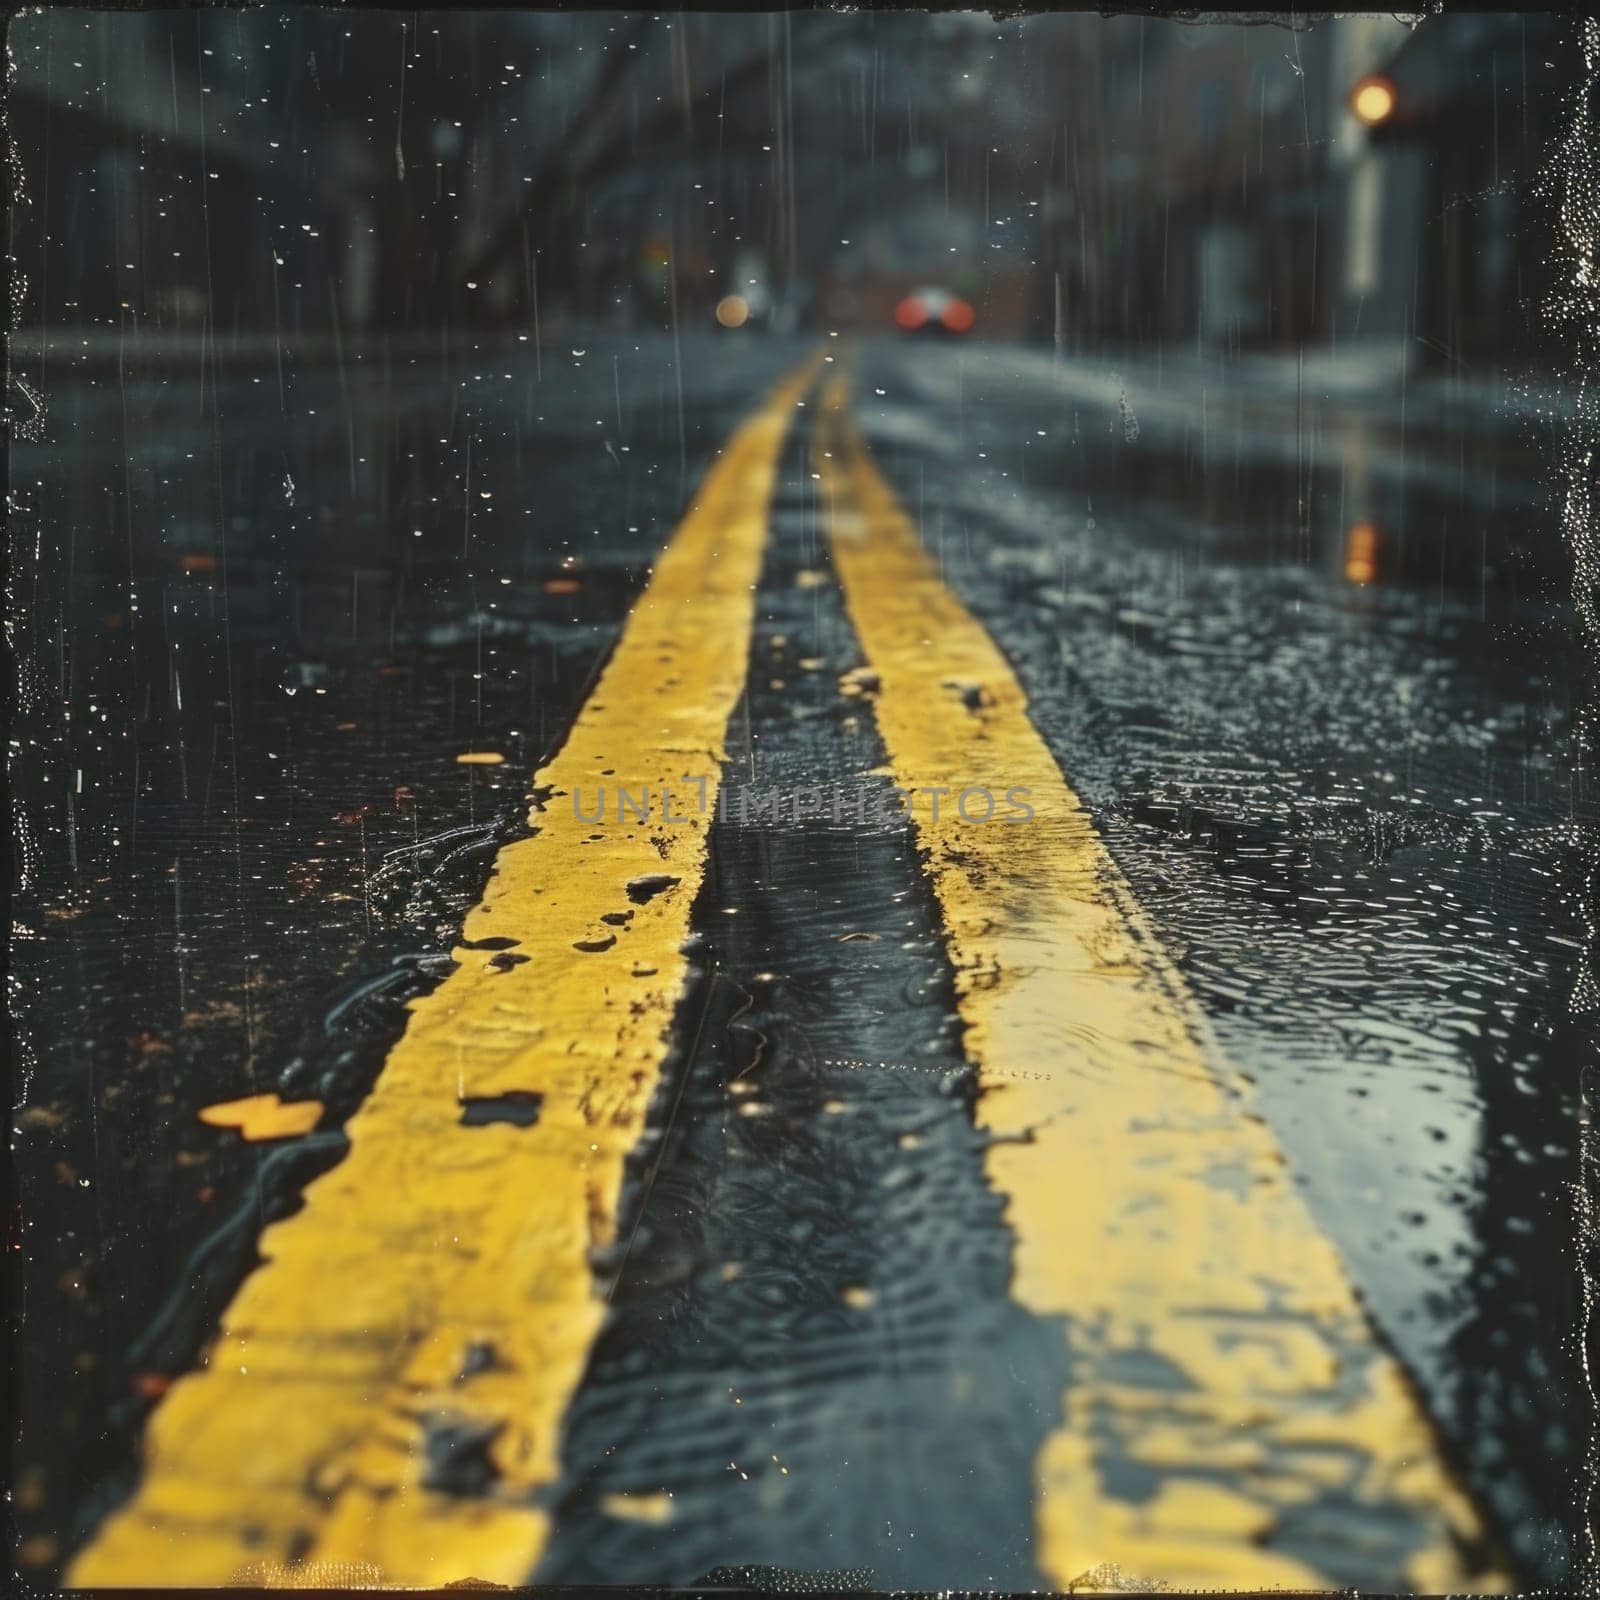 A wet street is shown with a bright yellow line painted down the center, glistening under the light.